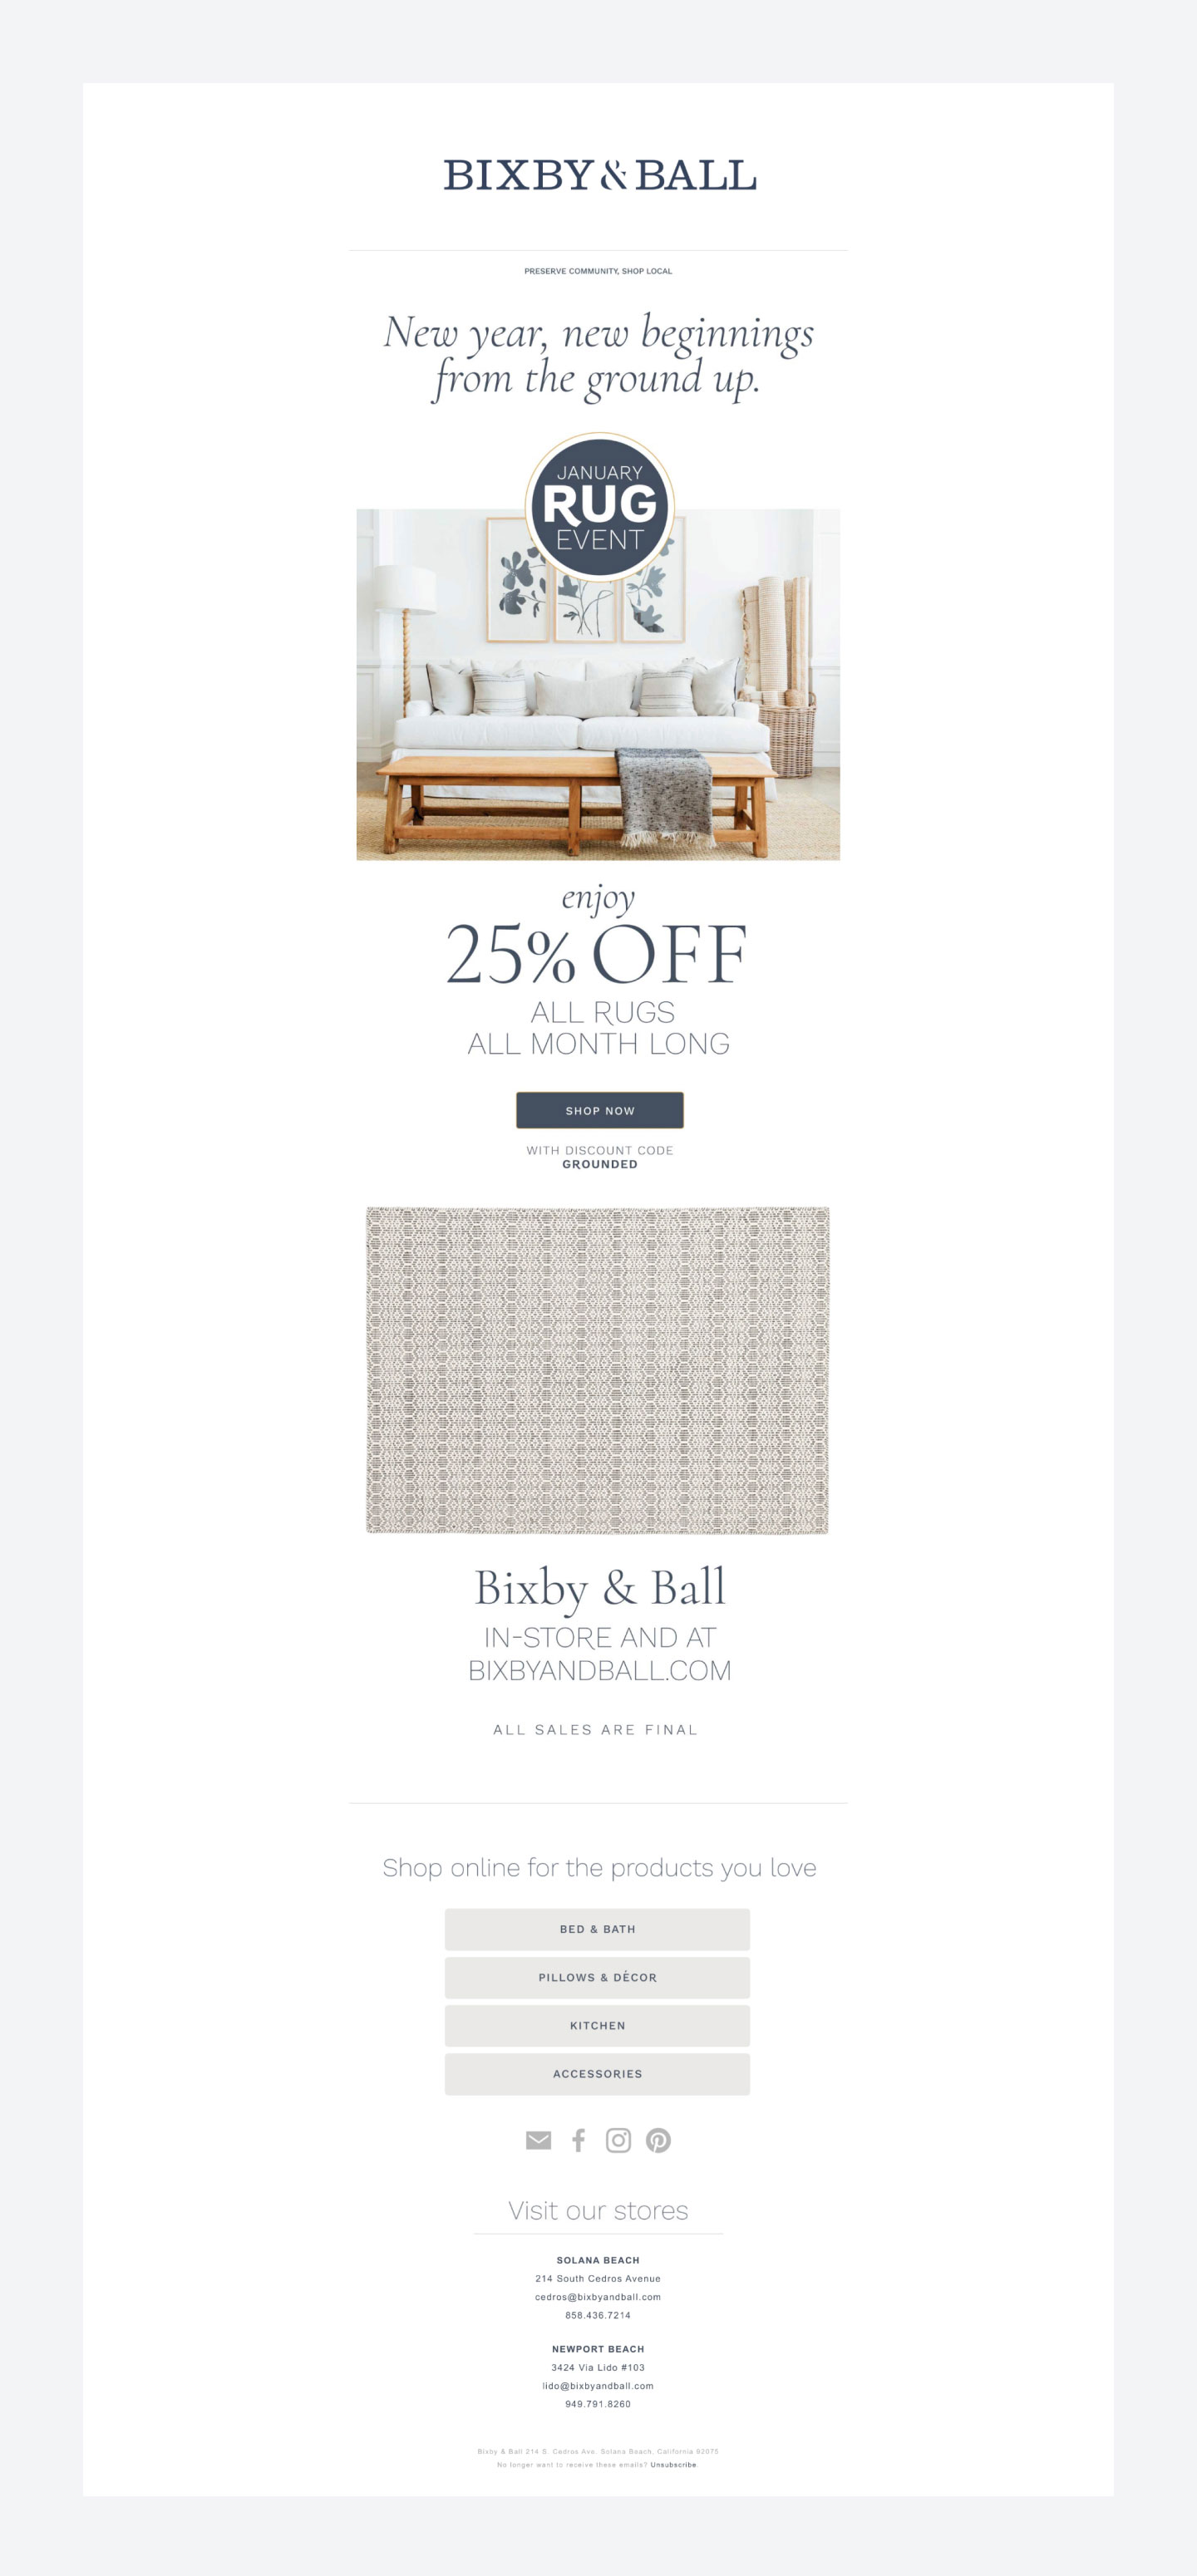 bixby and ball sofa and table set promotion with 25% discount